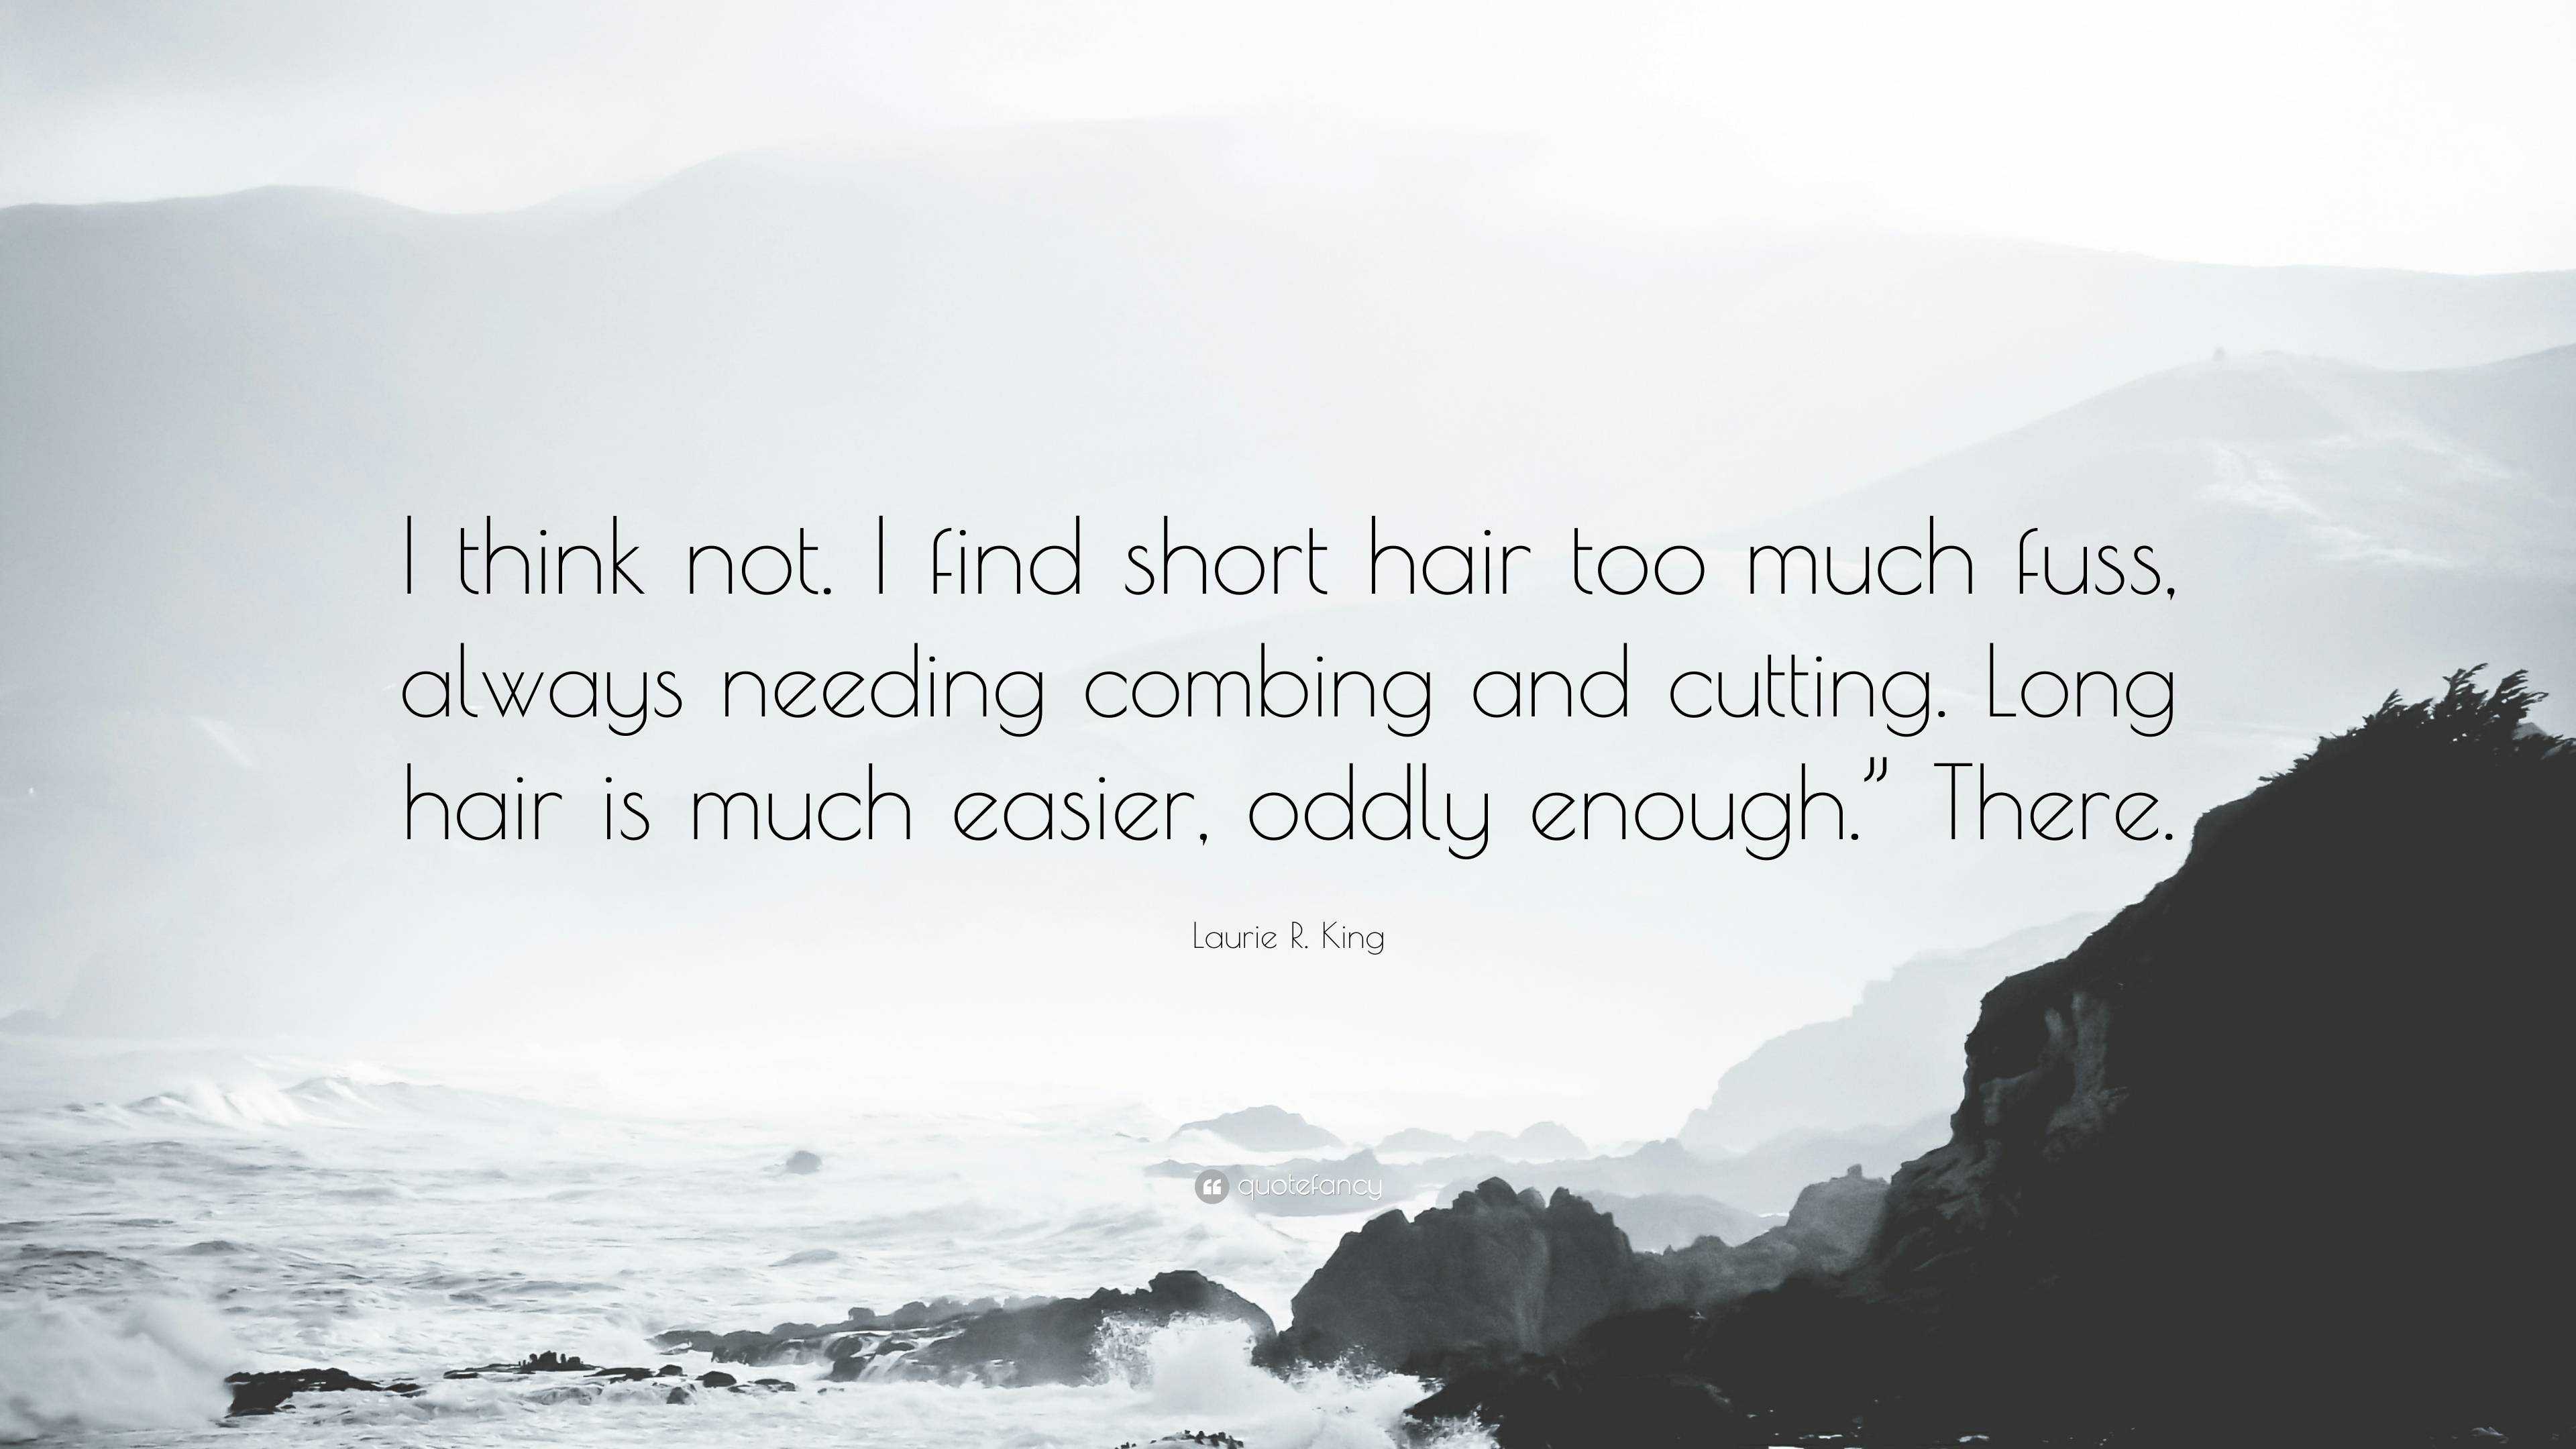 Laurie R. King Quote: “I think not. I find short hair too much fuss, always  needing combing and cutting. Long hair is much easier, oddly enough...”